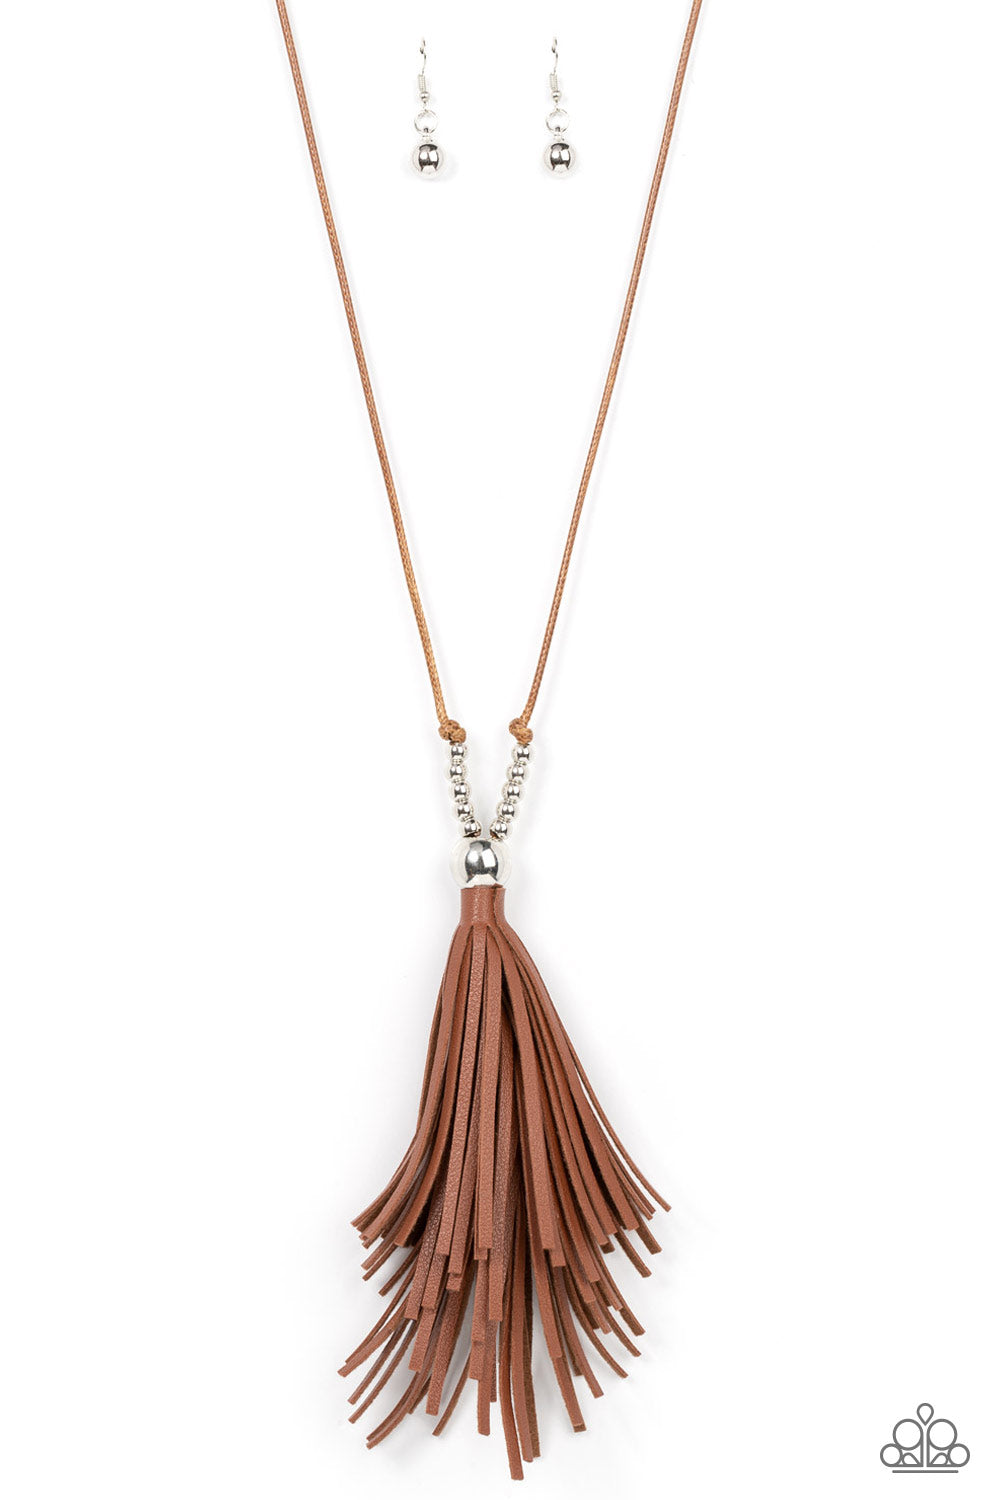 Paparazzi Accessories - A Clean Sweep #N22 Box 2 - Brown Necklace